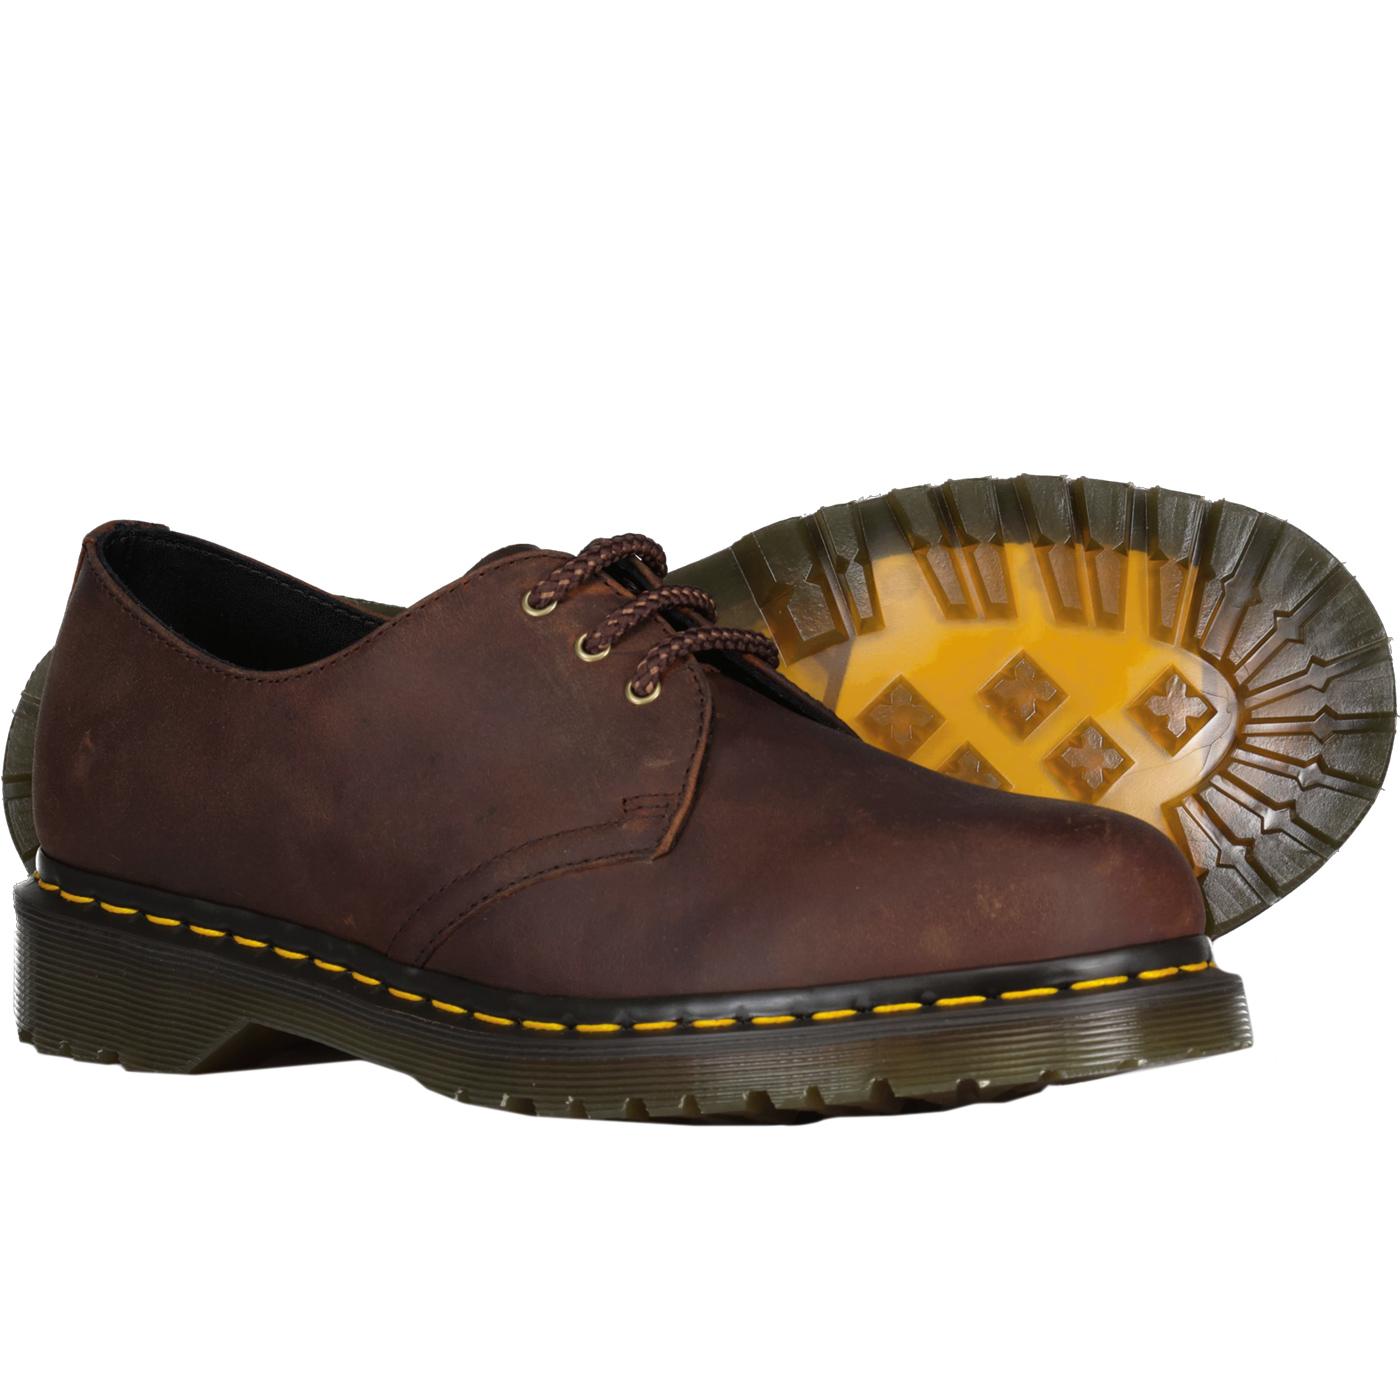 1461 Dr Martens Waxed Full Grain Leather Shoes in Brown